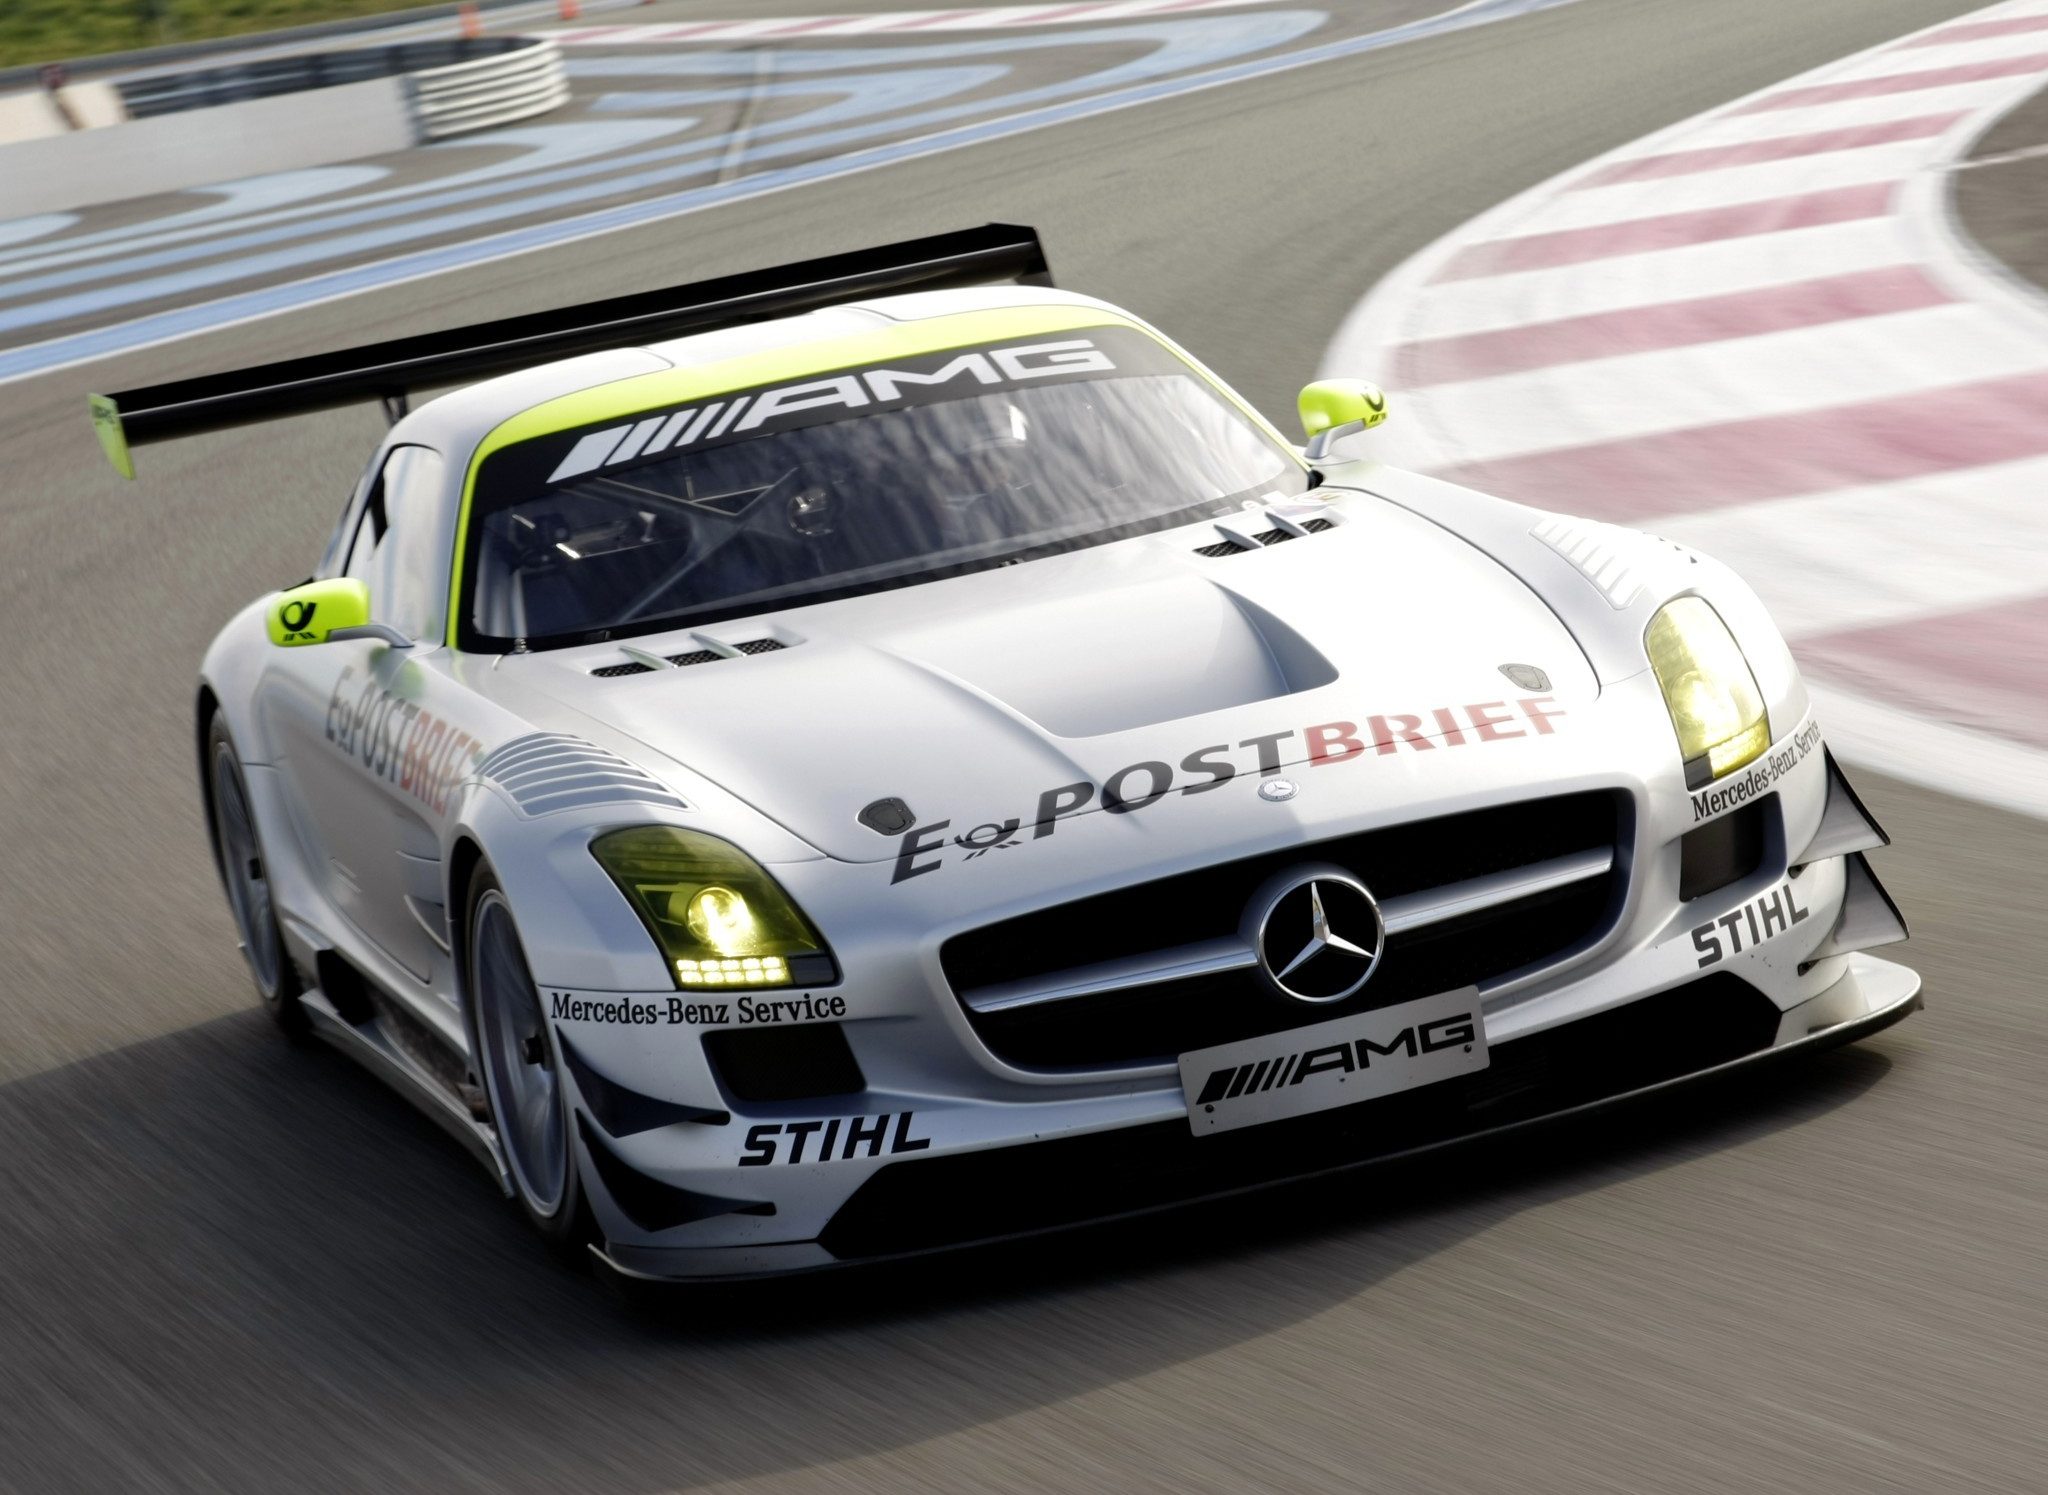 Car Of The Day: 2011 Mercedes-Benz SLS AMG GT3